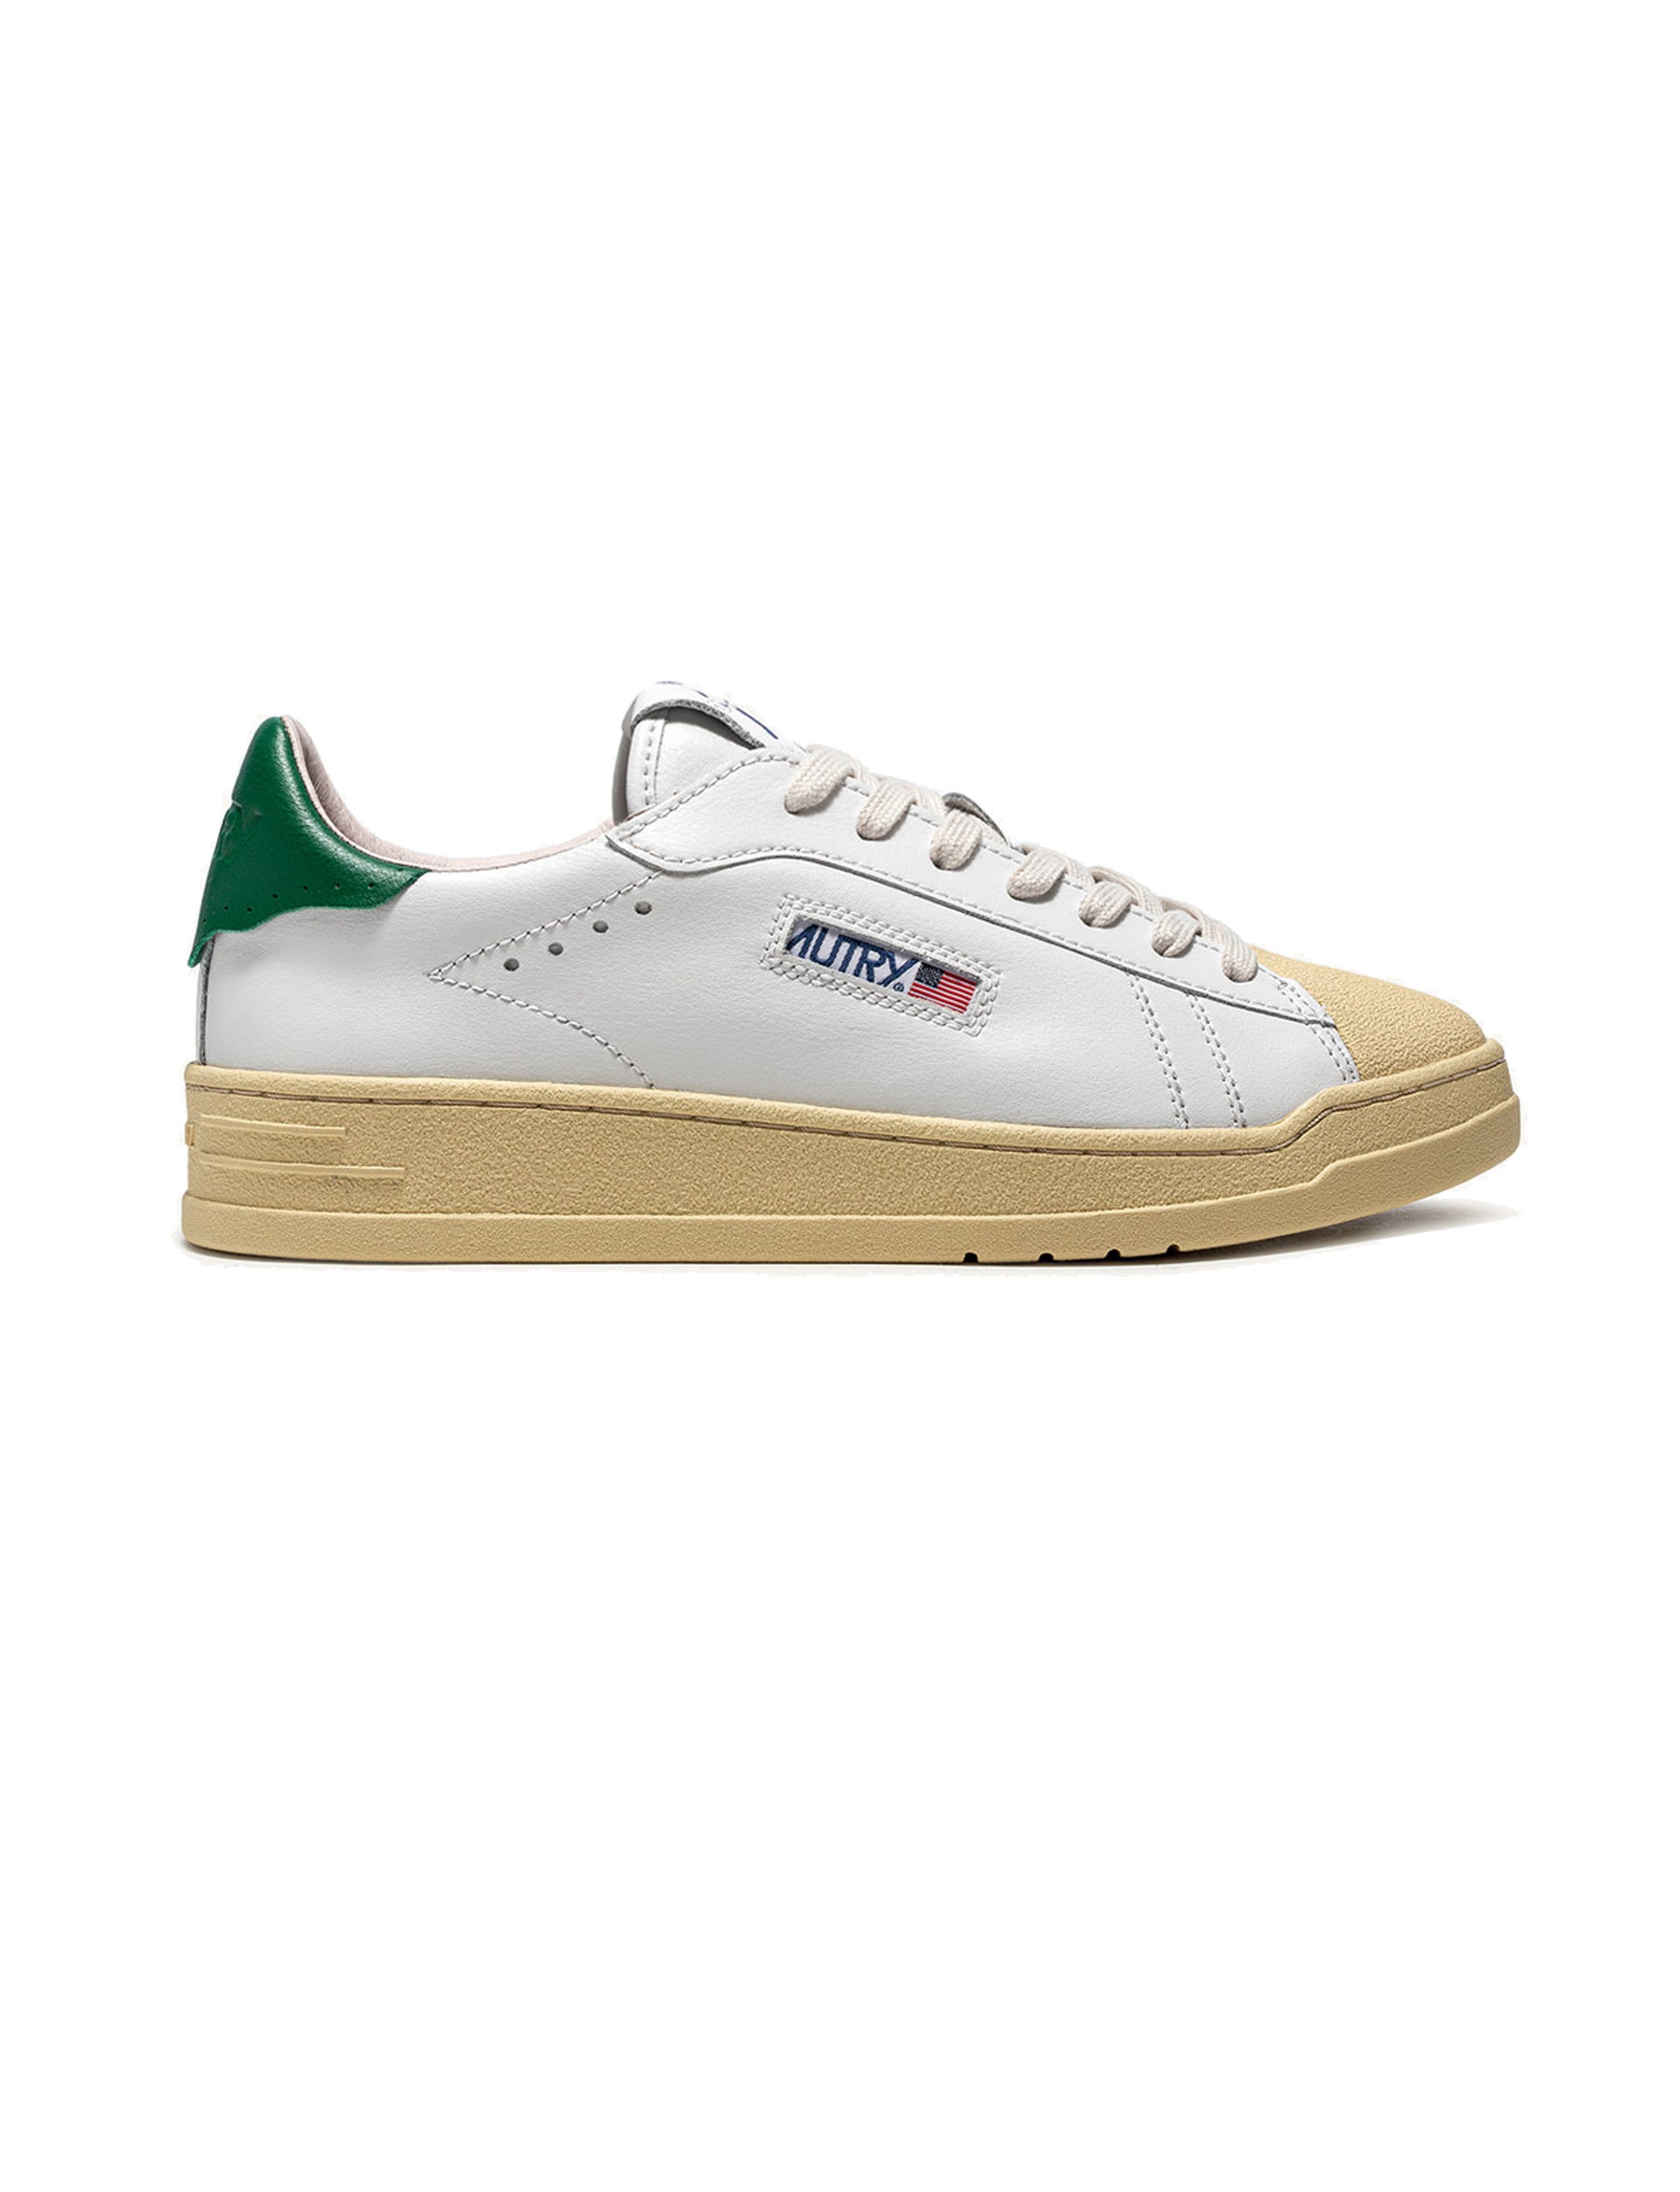 AUTRY SNEAKERS MAN BOB LUTZ LOW SNEAKERS IN LEATHER COLOR WHITE GREEN